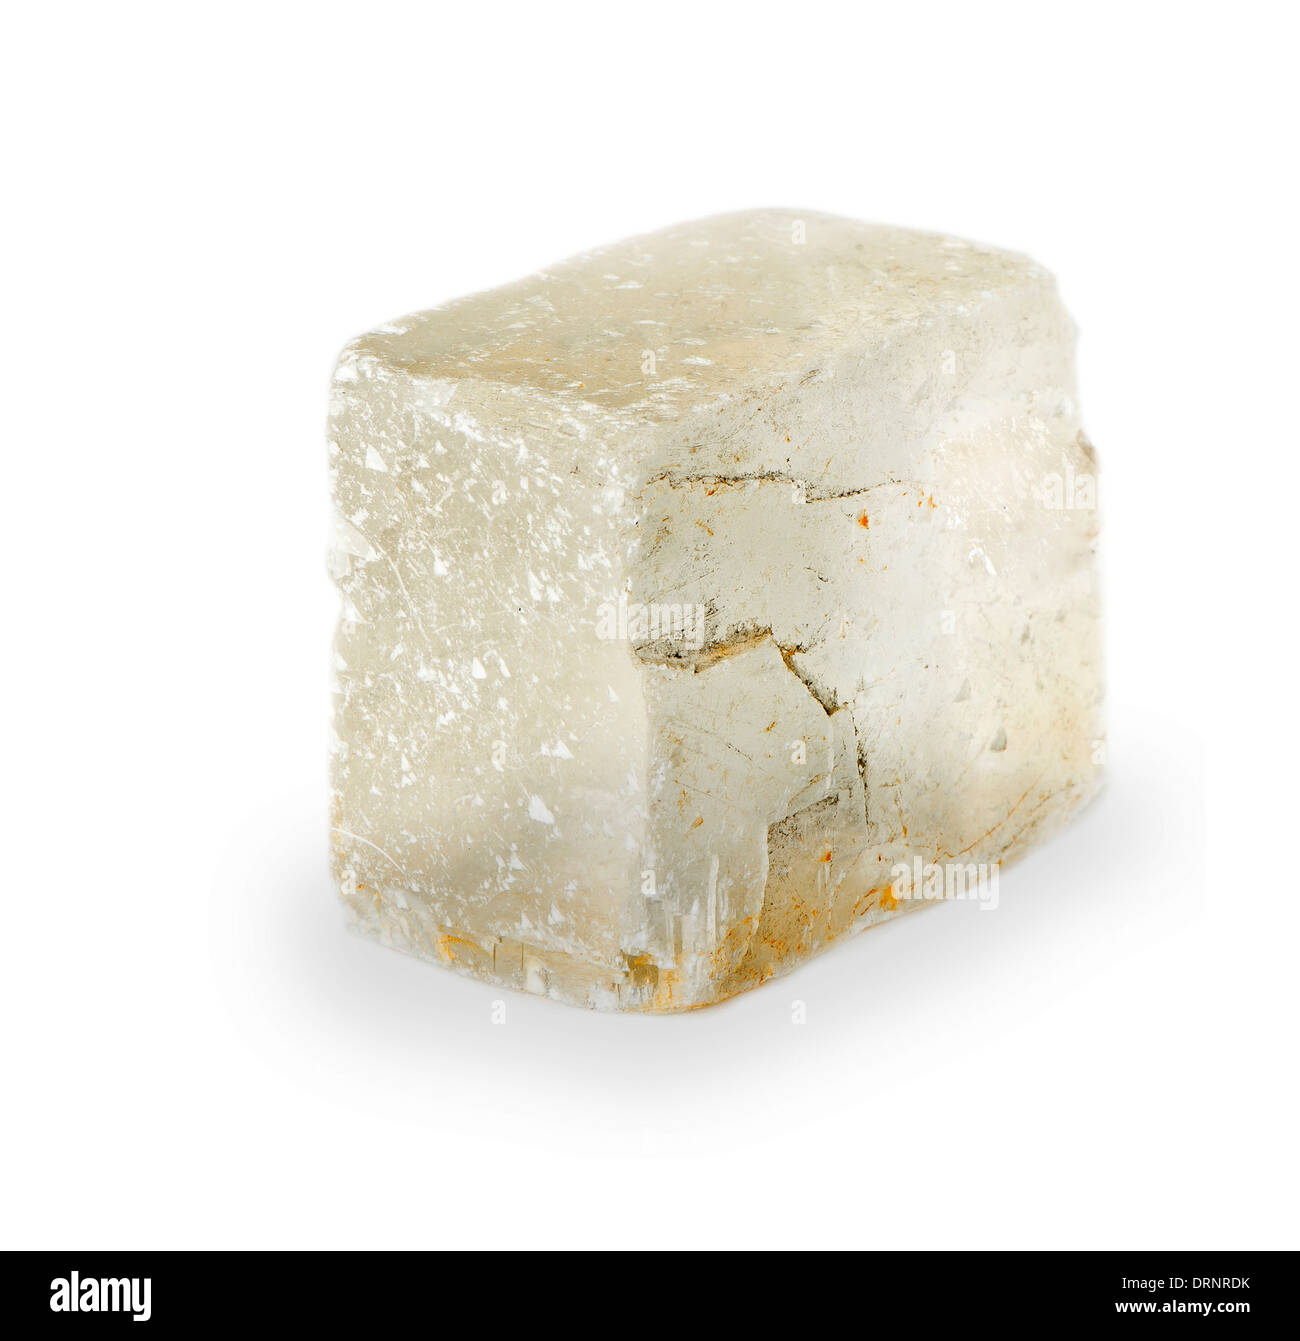 Calcite , Iceland Spar crystal isolated Stock Photo